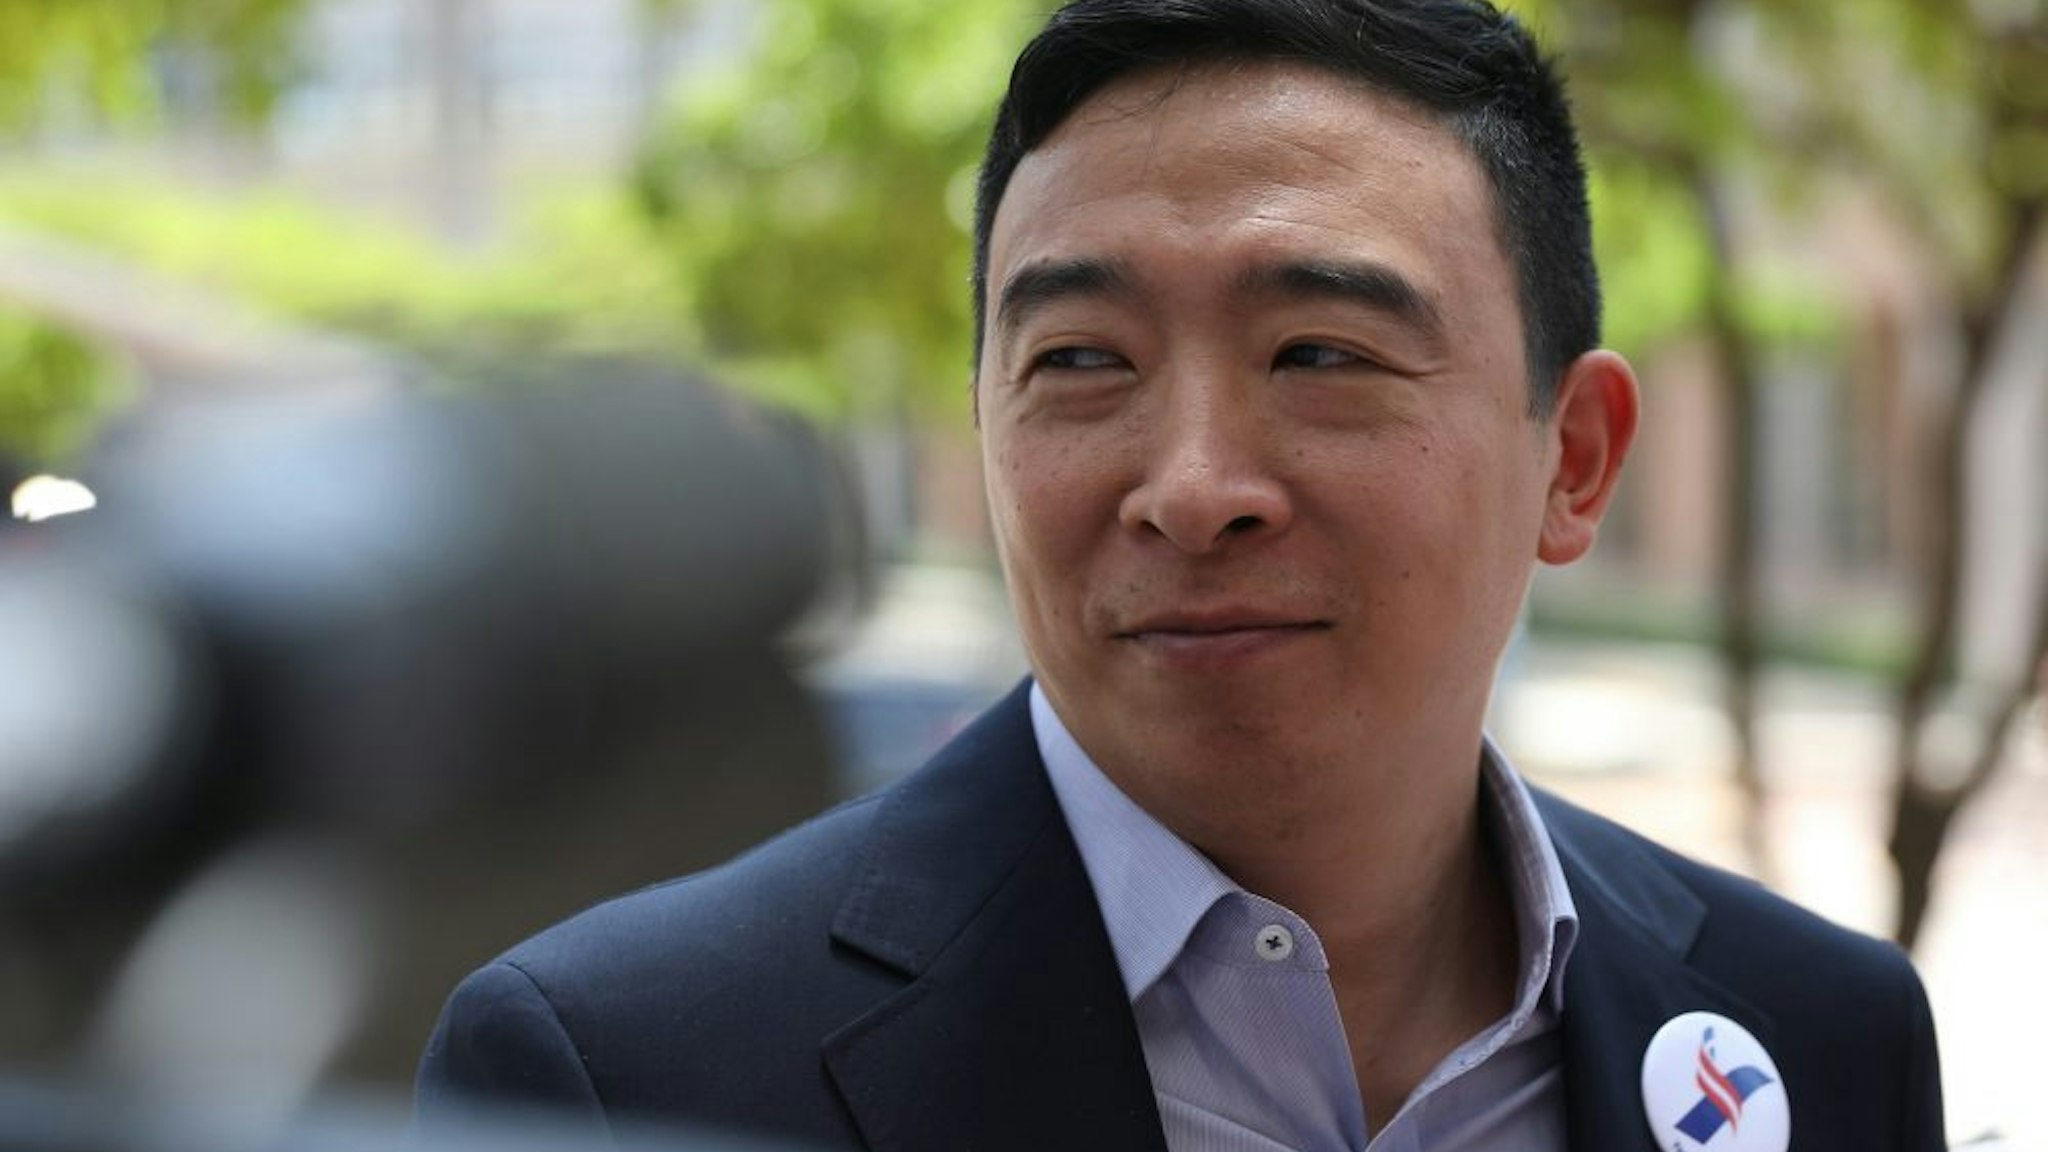 MIAMI, FLORIDA - JUNE 26: Democratic presidential candidate Andrew Yang speaks to media outside the Knight Concert Hall of the Adrienne Arsht Center for the Performing Arts of Miami-Dade County June 26, 2019 in Miami, Florida. A field of 20 Democratic presidential candidates was split into two groups of 10 for the first debate of the 2020 election, taking place over two nights at Knight Concert Hall of the Adrienne Arsht Center for the Performing Arts of Miami-Dade County, hosted by NBC News, MSNBC, and Telemundo. Yang is participating in the second night's debate.